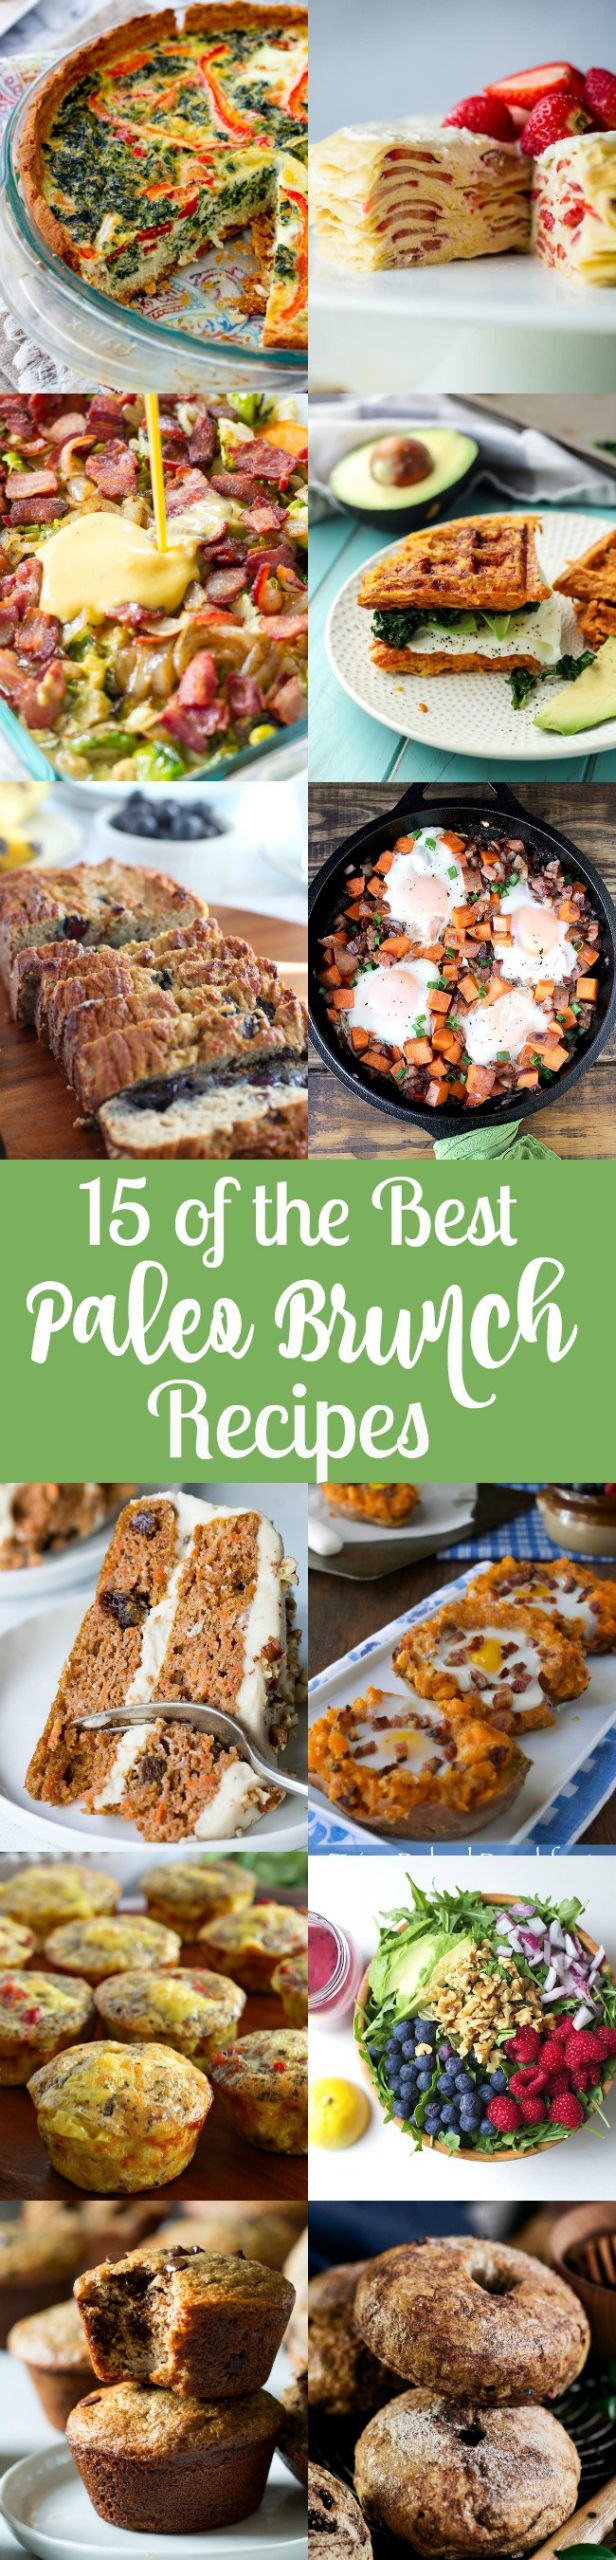 Dairy Free Brunch Recipes
 15 of the Best Paleo Brunch Recipes